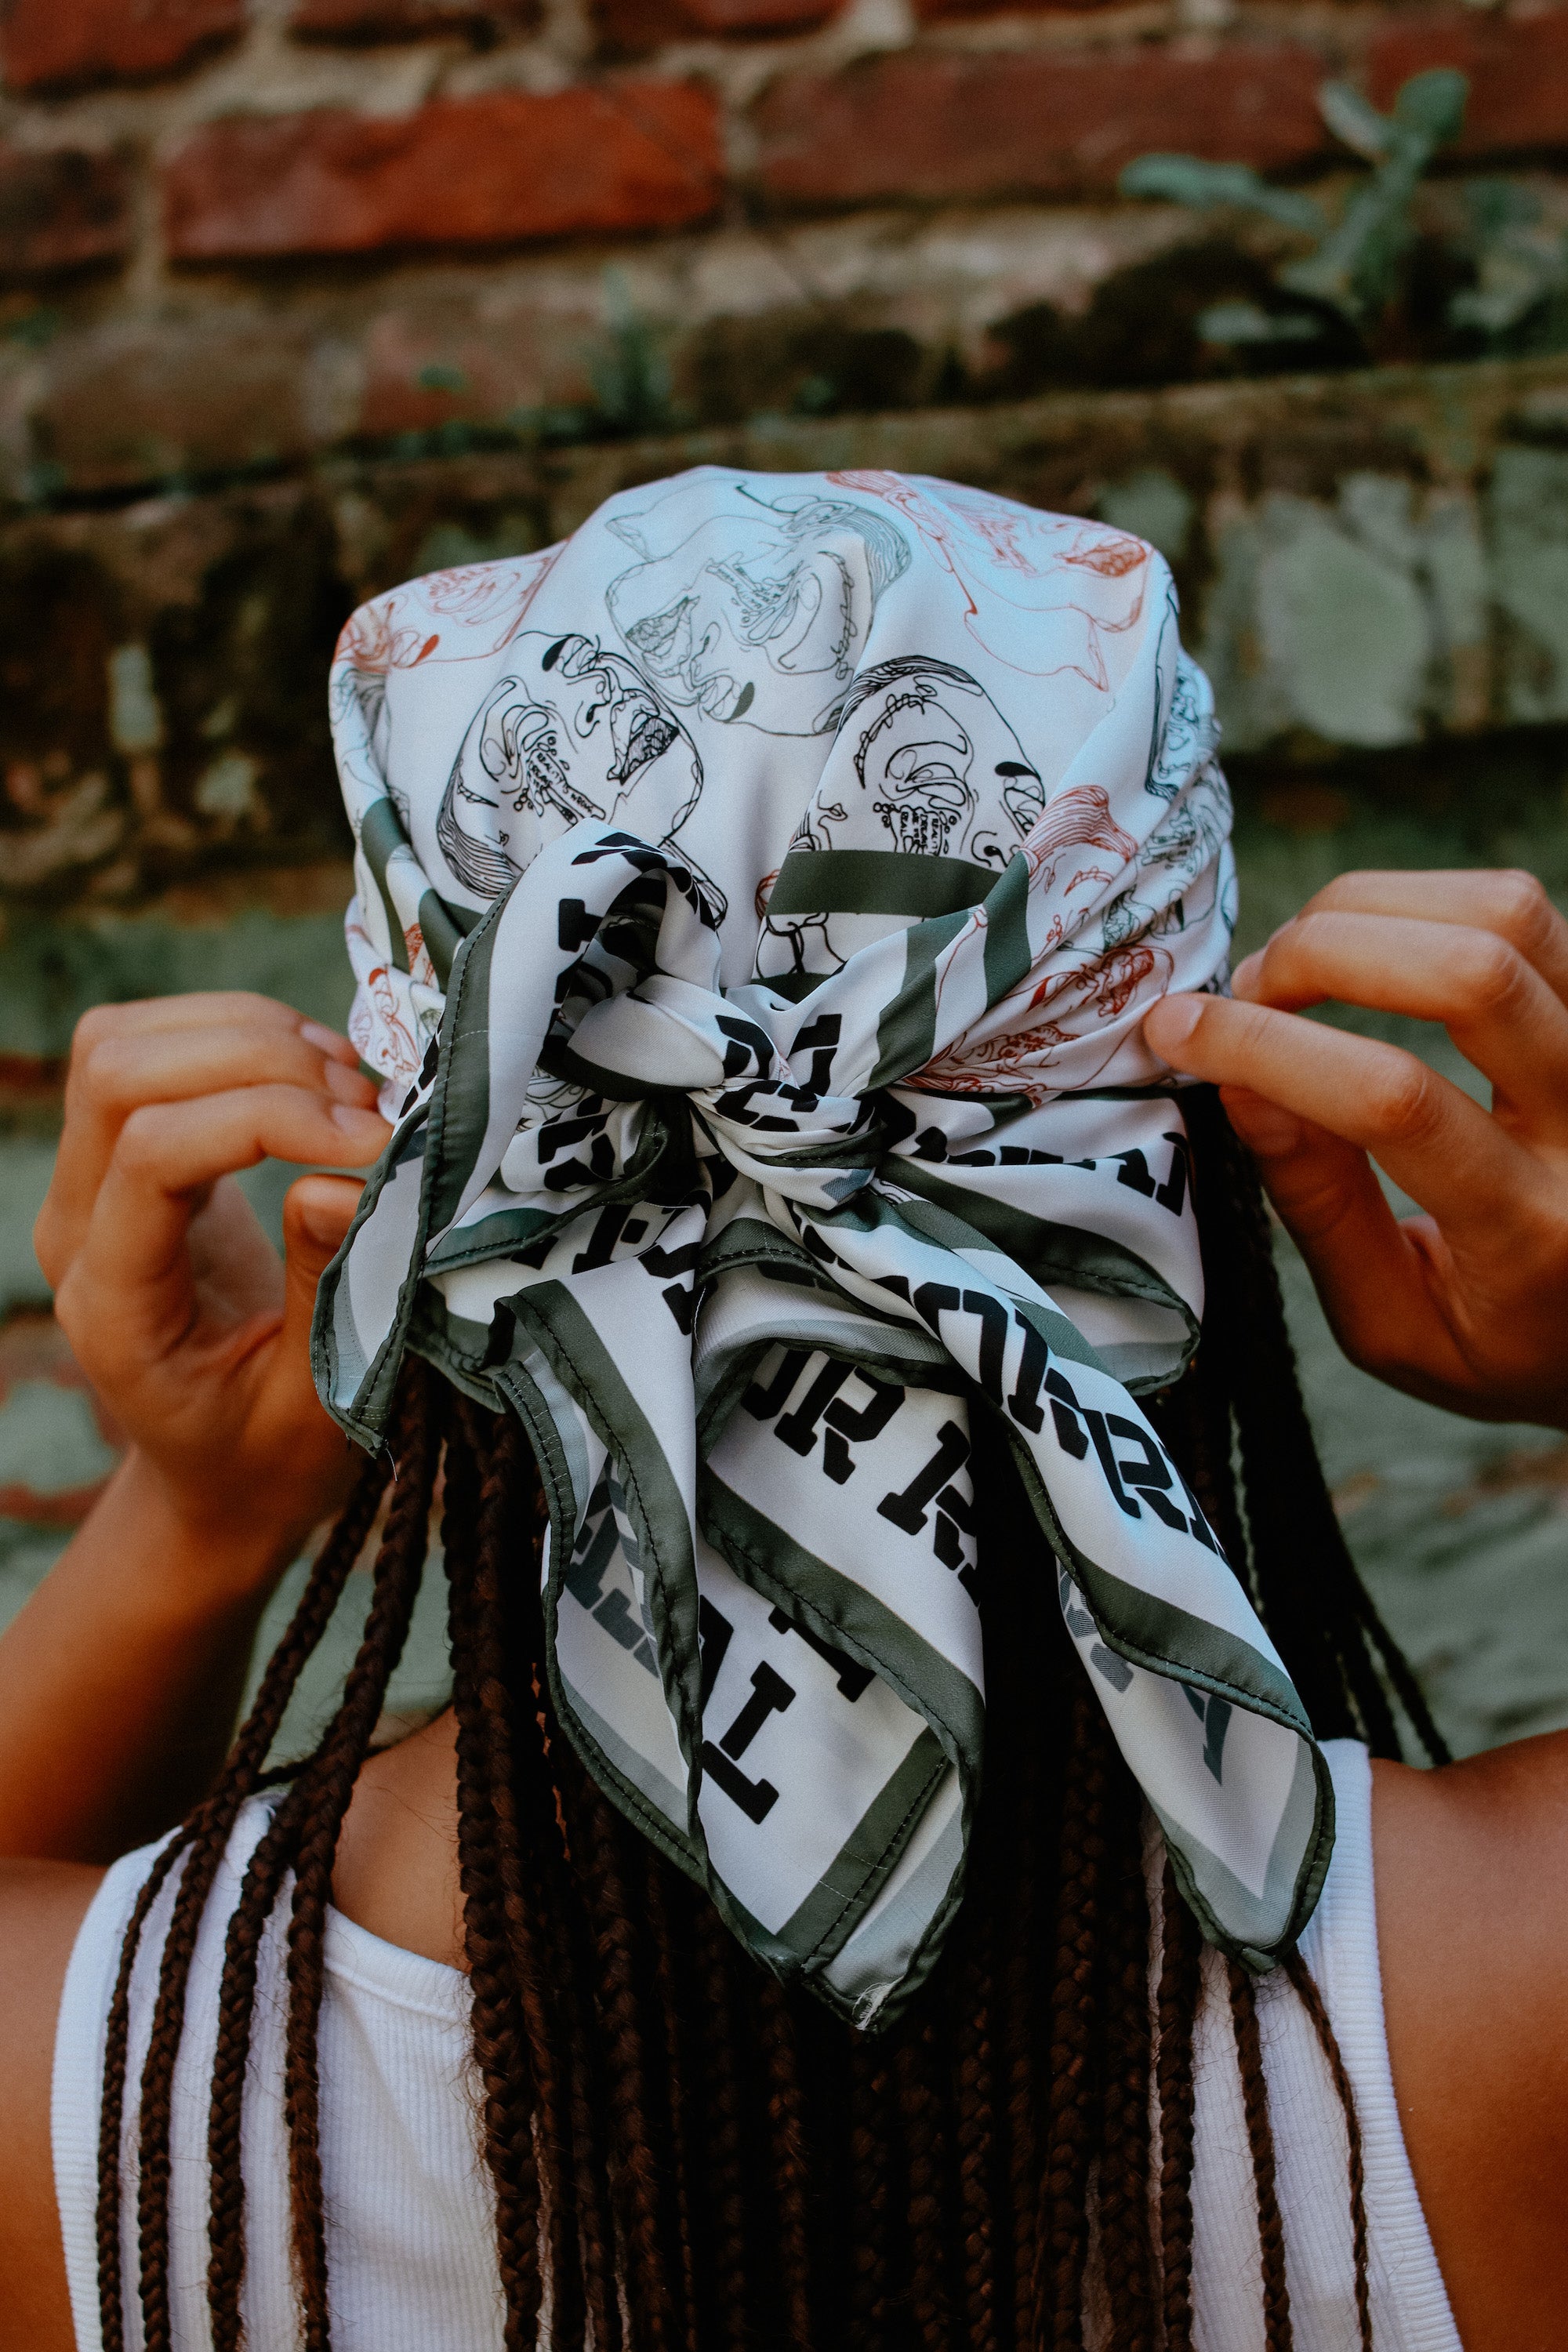 "Reality is wrong, dreams are for real" Bandana